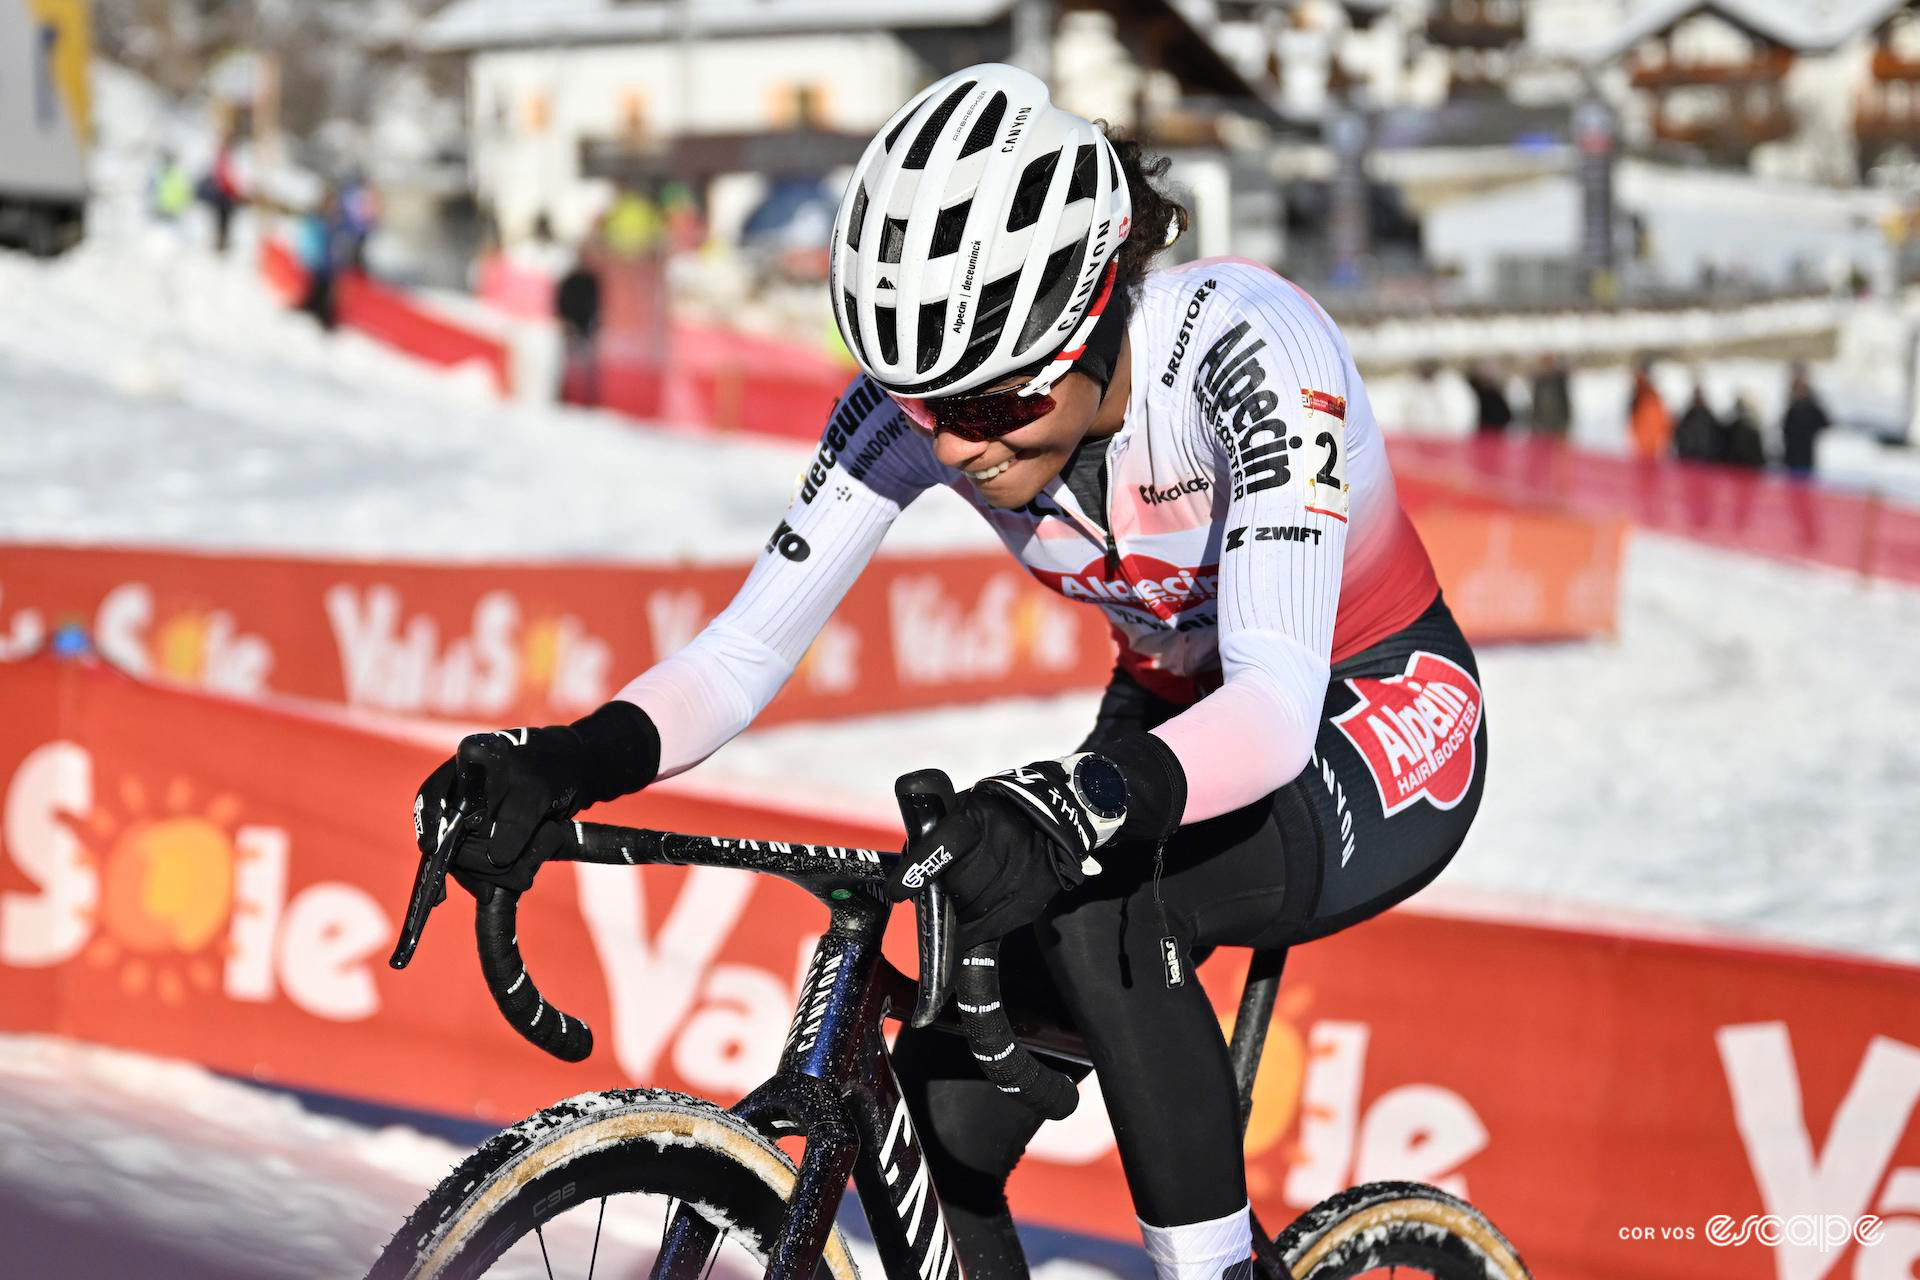 Ceylin del Carmen Alvarado in the World Cup leader's jersey during UCI Cyclocross World Cup Val di Sole.